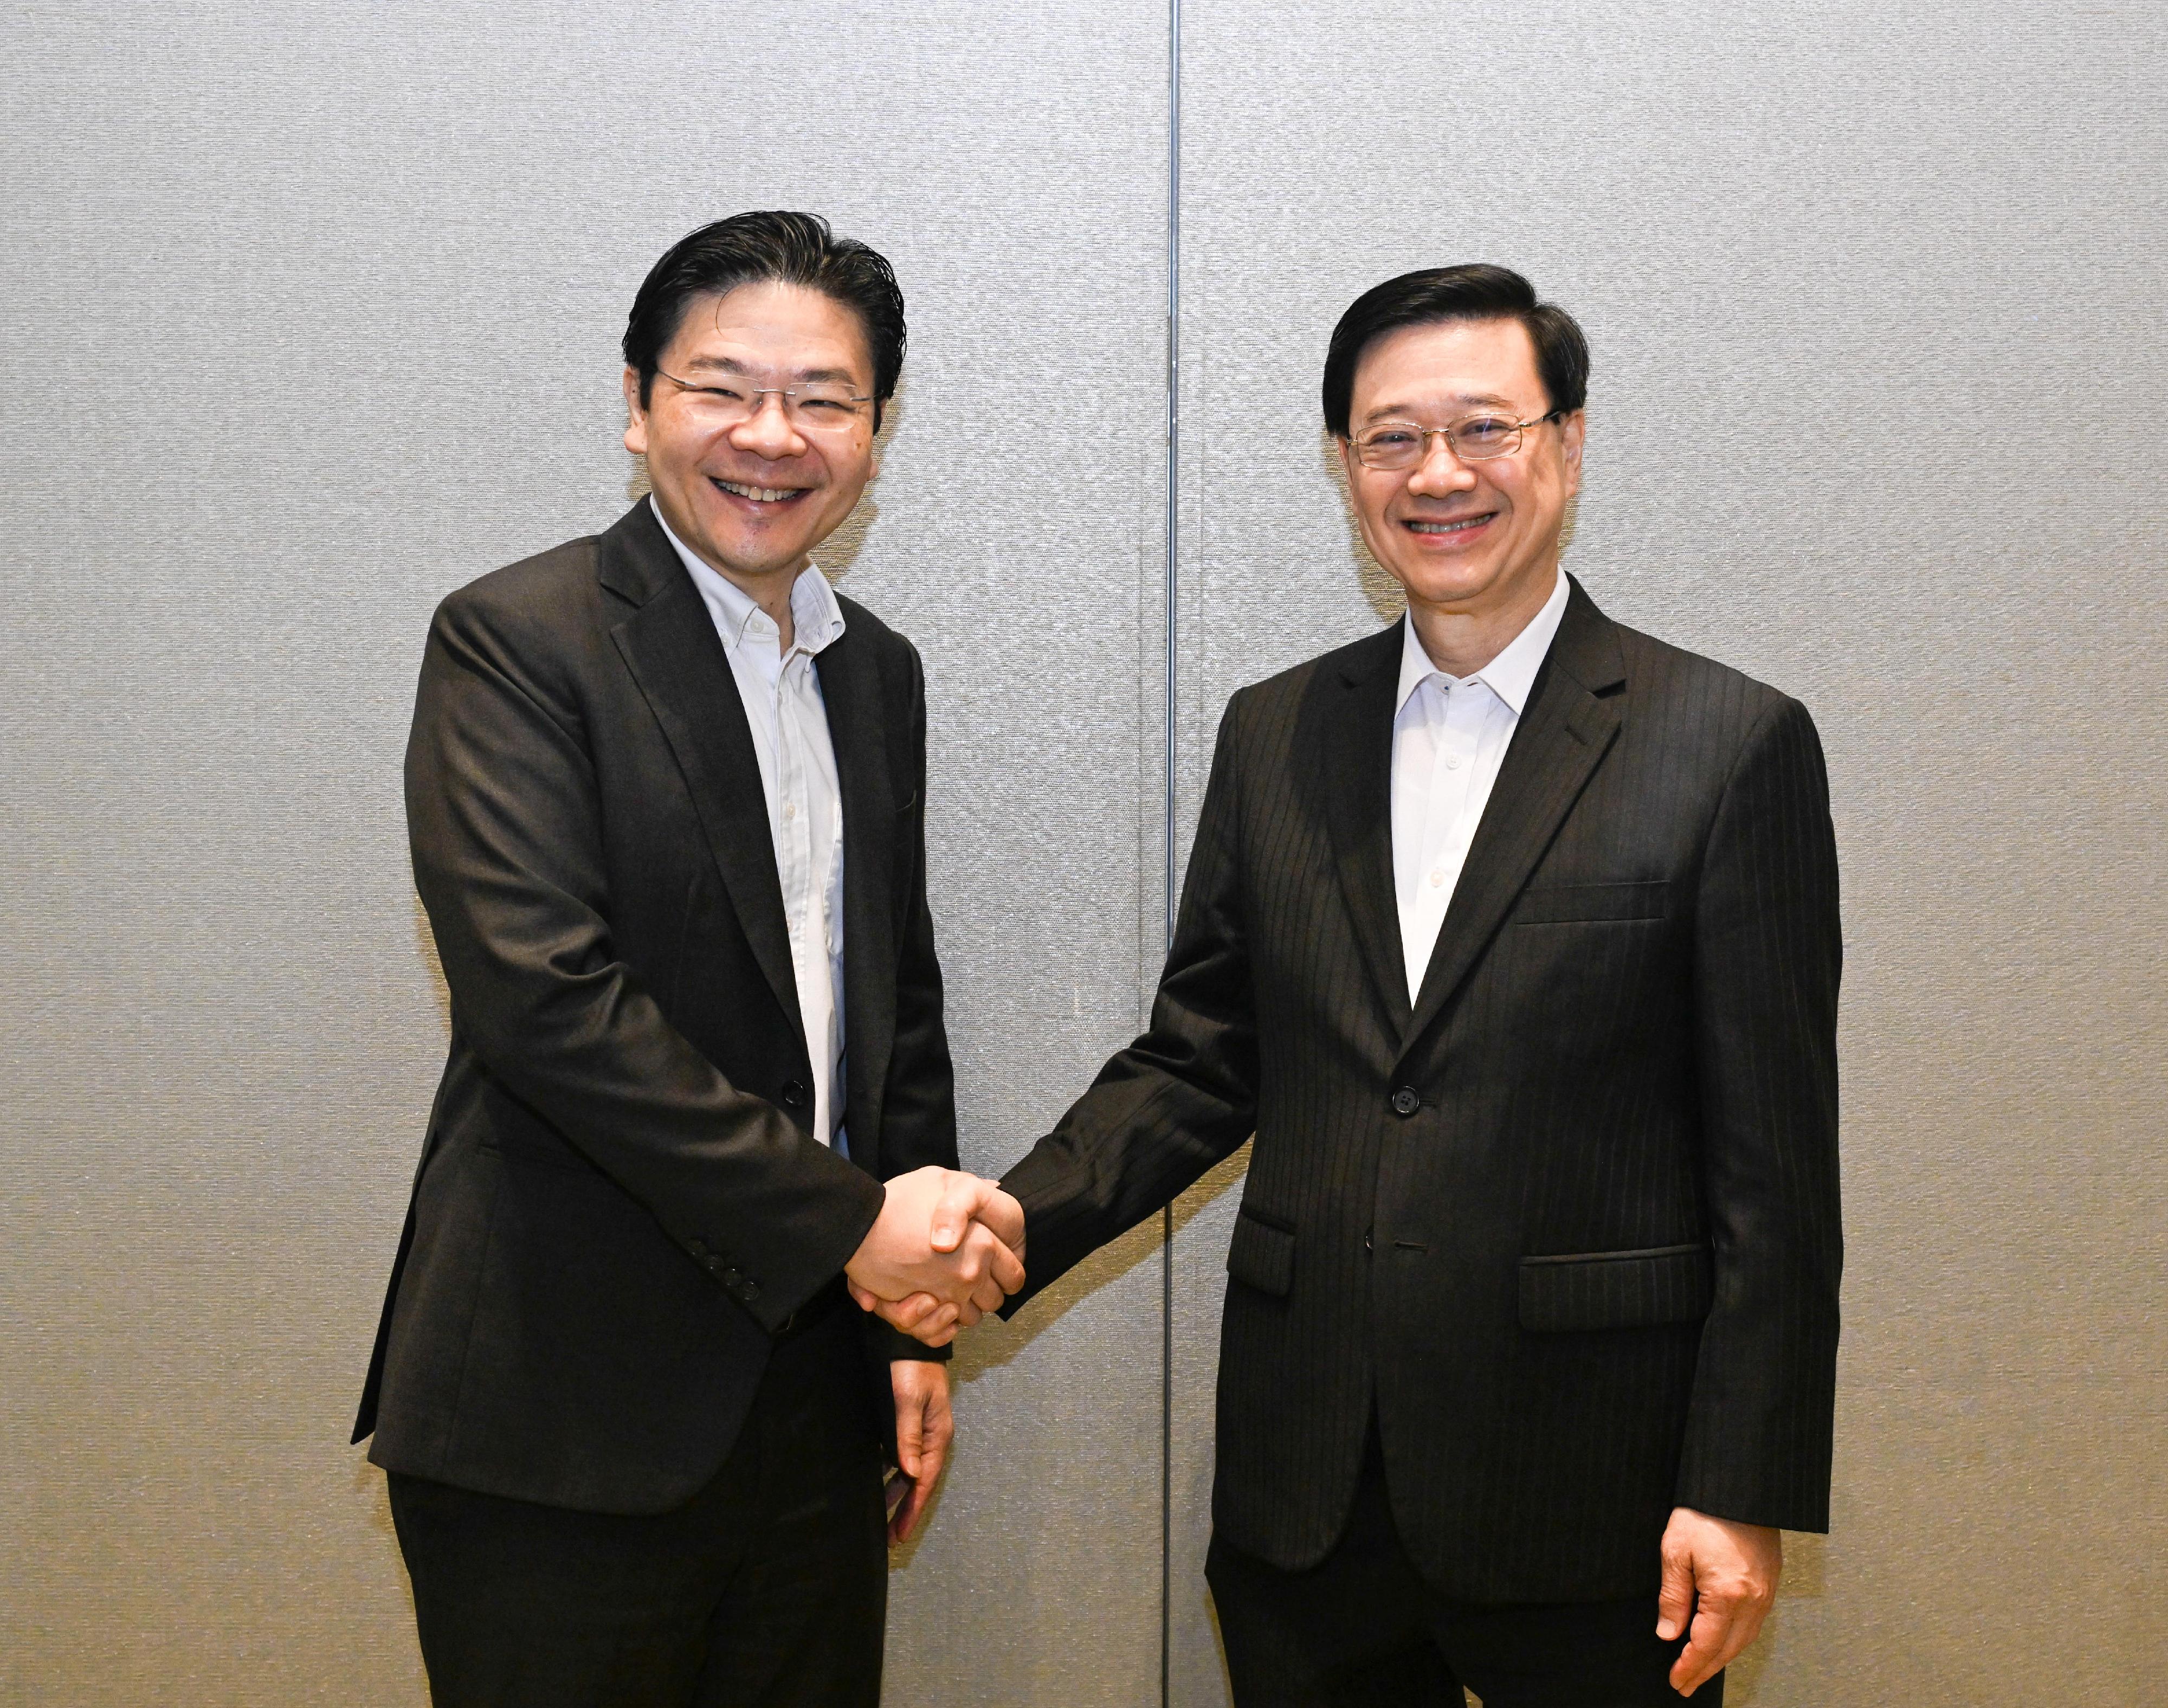 The Chief Executive, Mr John Lee, attended a breakfast meeting with the Deputy Prime Minister and Minister for Finance of Singapore, Mr Lawrence Wong, in Singapore today (July 24). Photo shows Mr Lee (right) and Mr Wong (left).